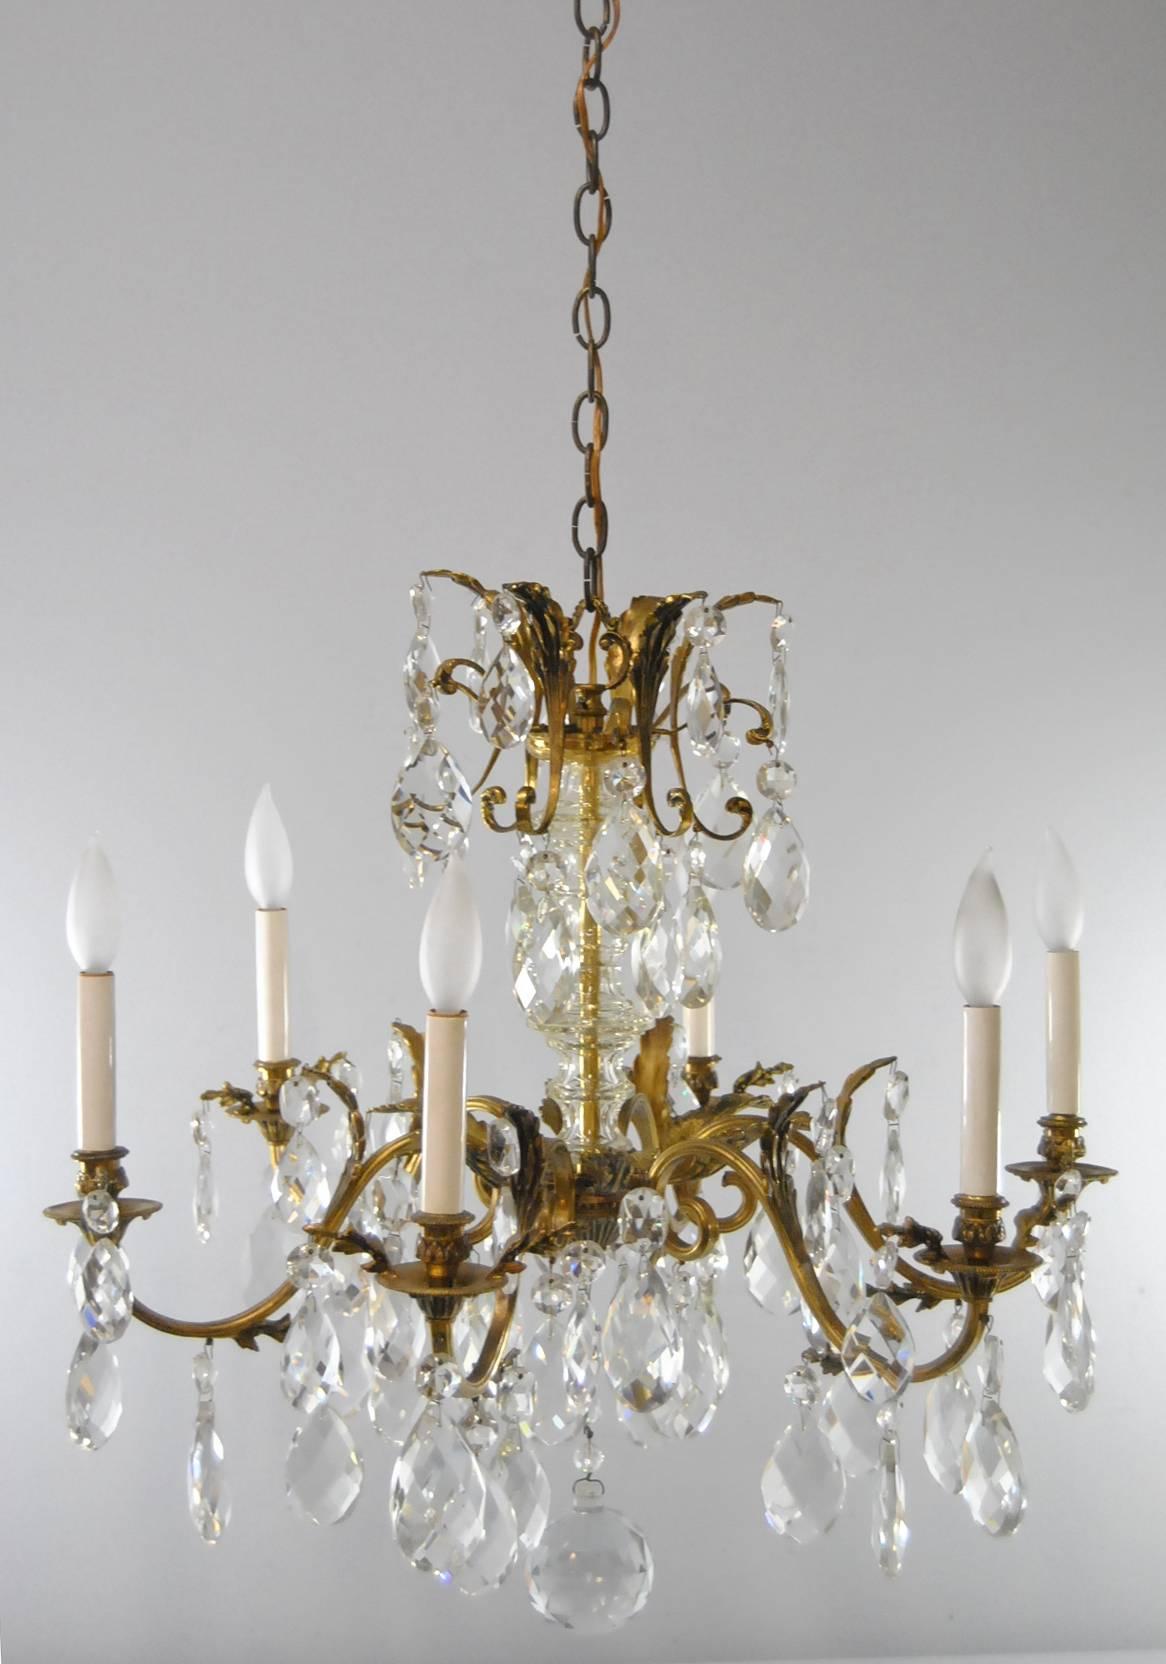 A beautiful six-arm French bronze chandelier with crystal prisms. The chandelier features six arms with each arm holding large 2 3/4 and 2 1/4 inch prisms. The central body has a formed glass tube which leads to a double tiered crown adorned with